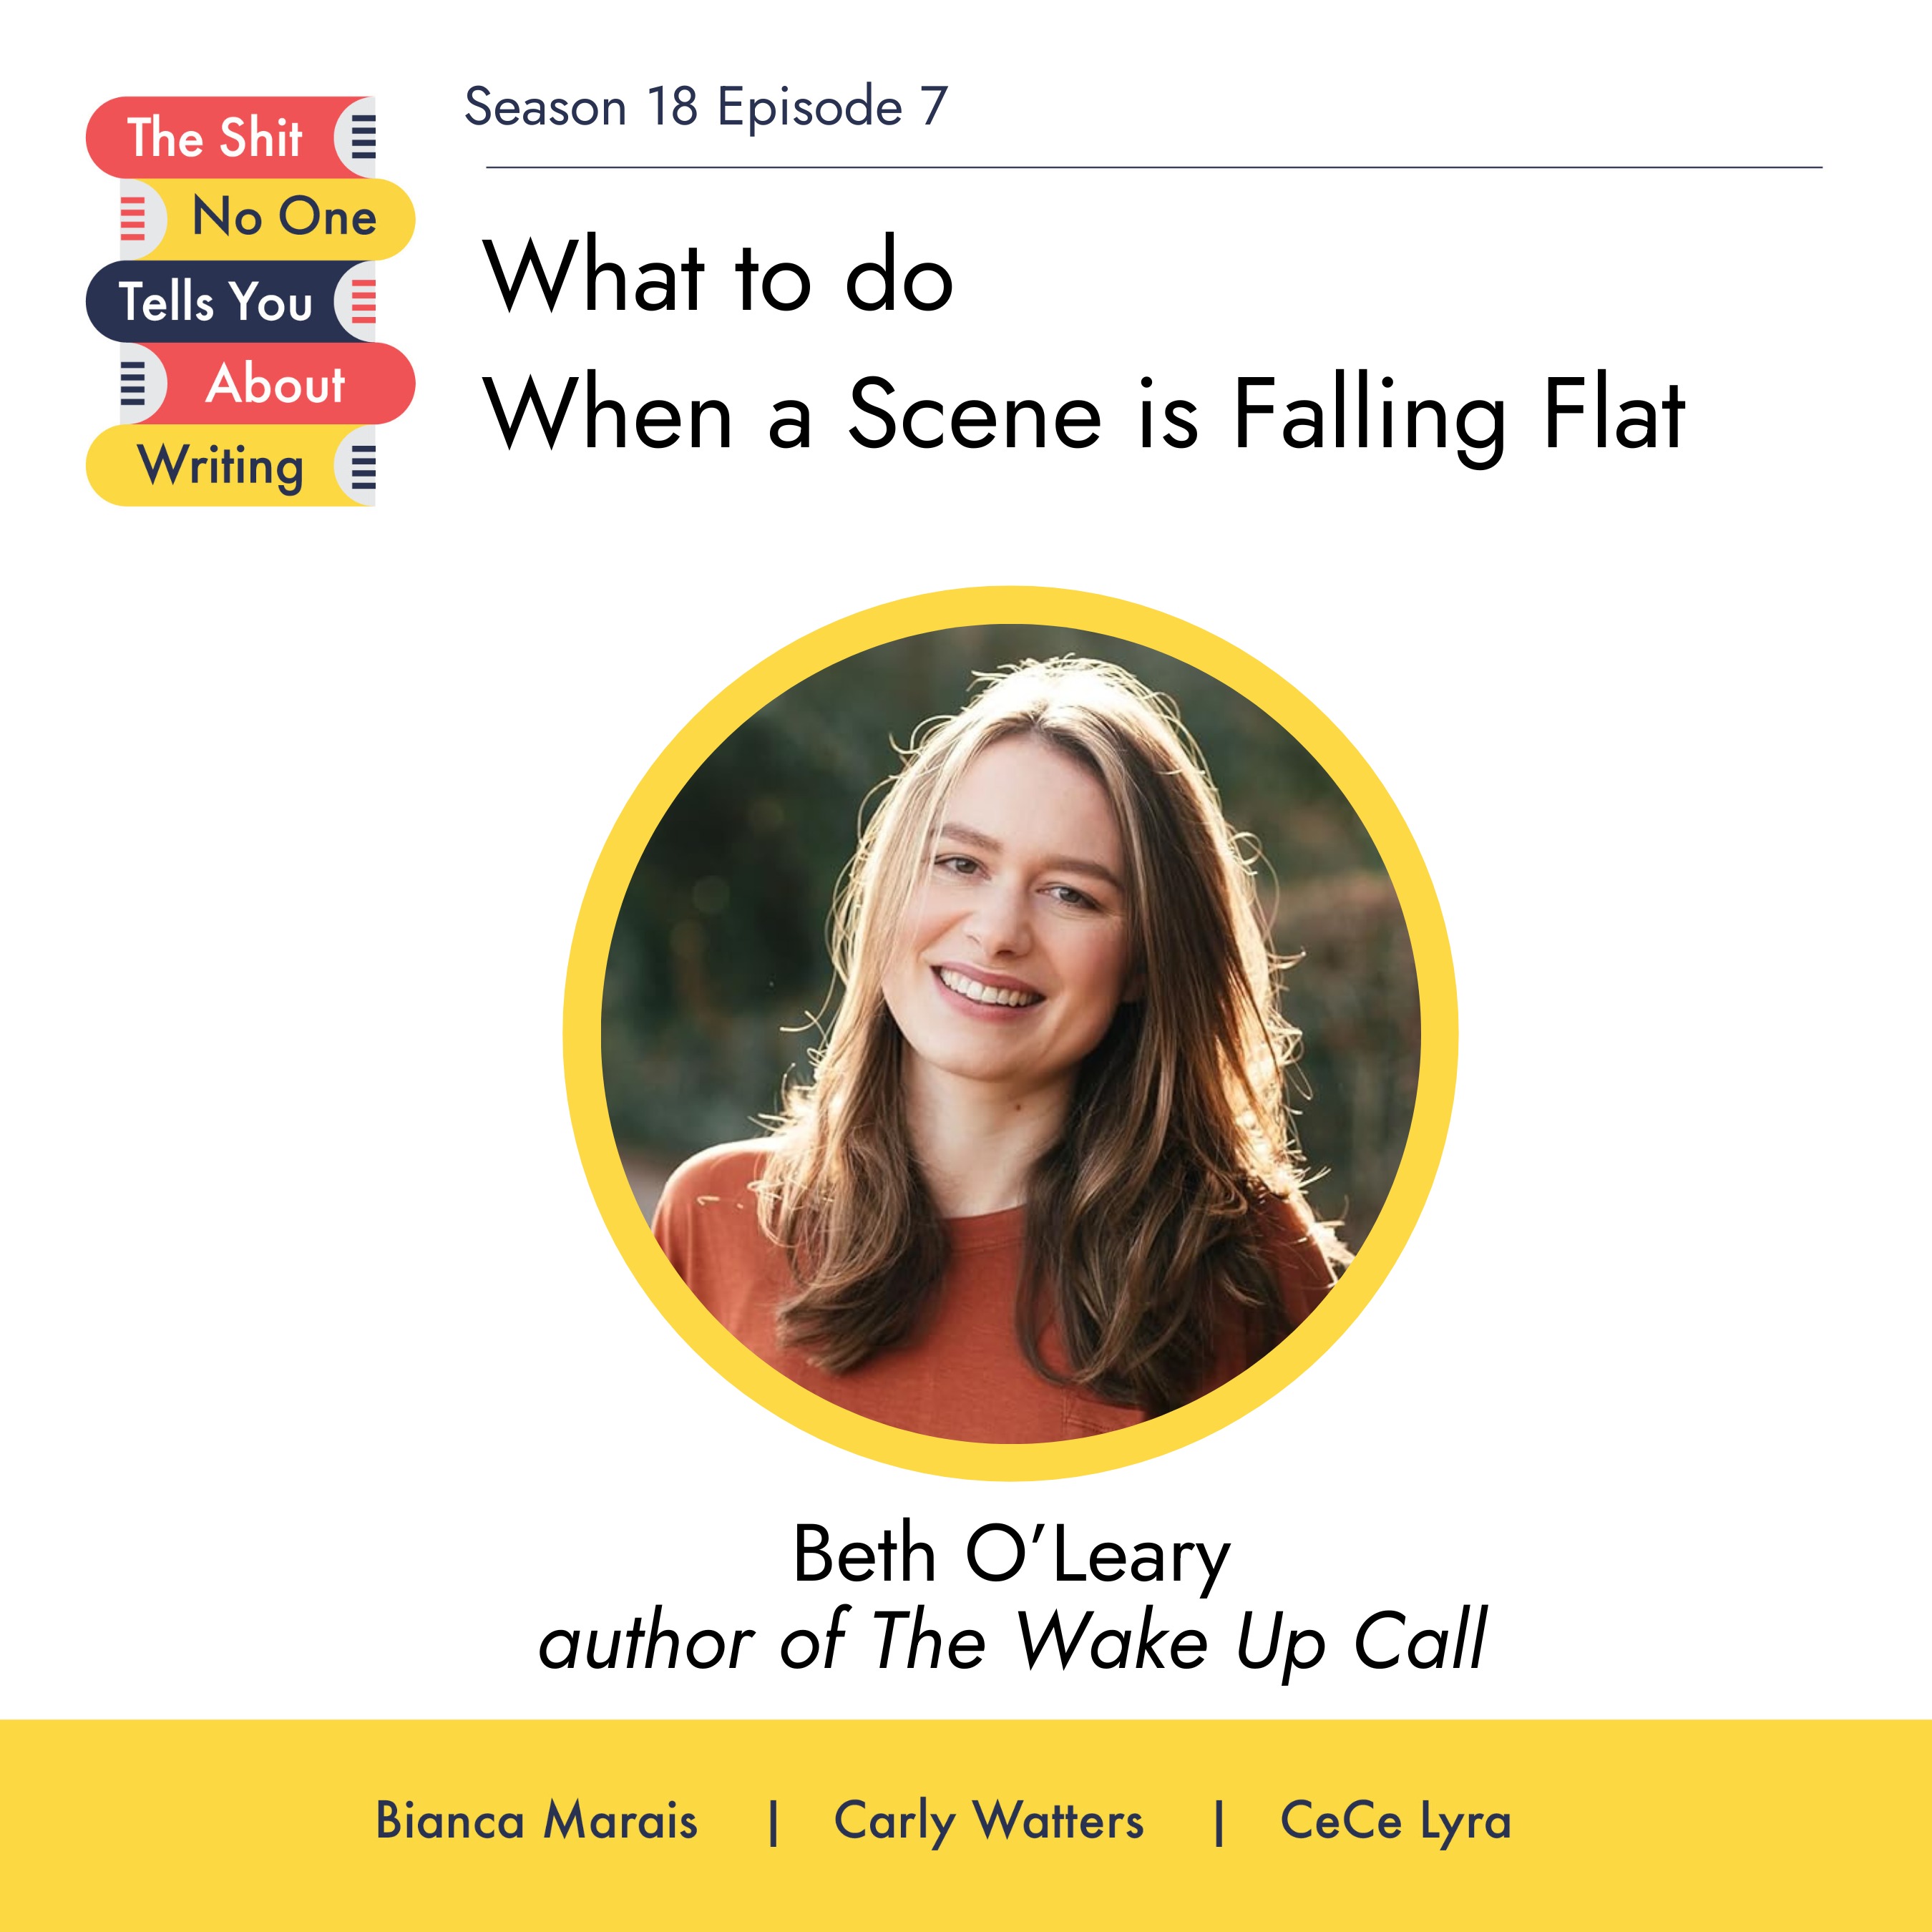 What to do When a Scene is Falling Flat